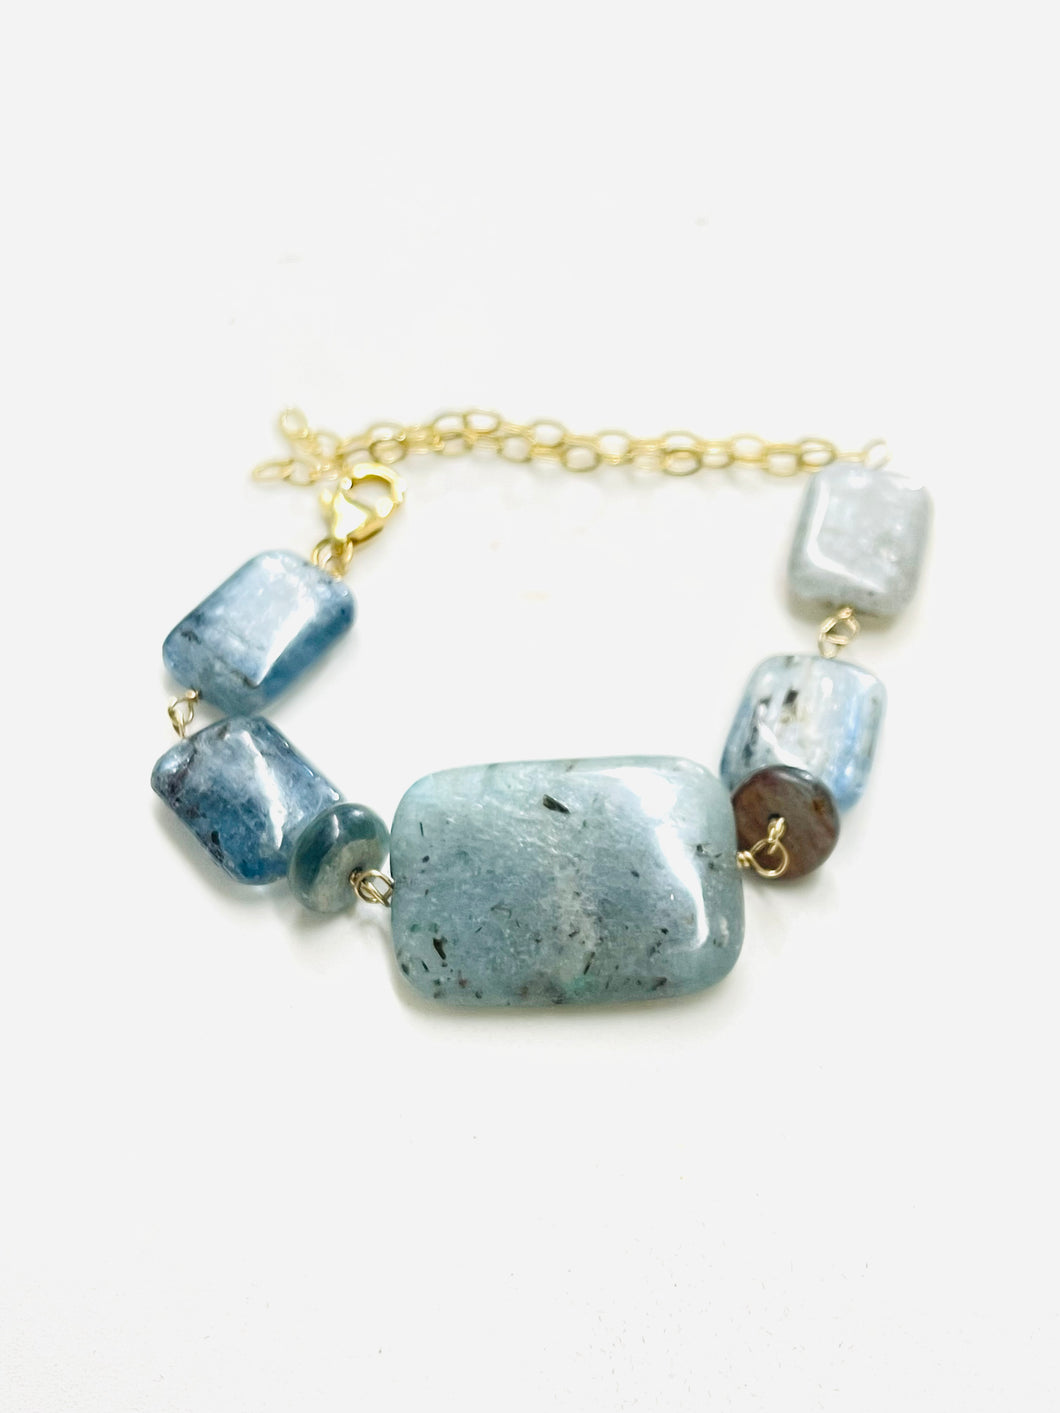 Bracelet with blue kyanite and gf chain-adjustable